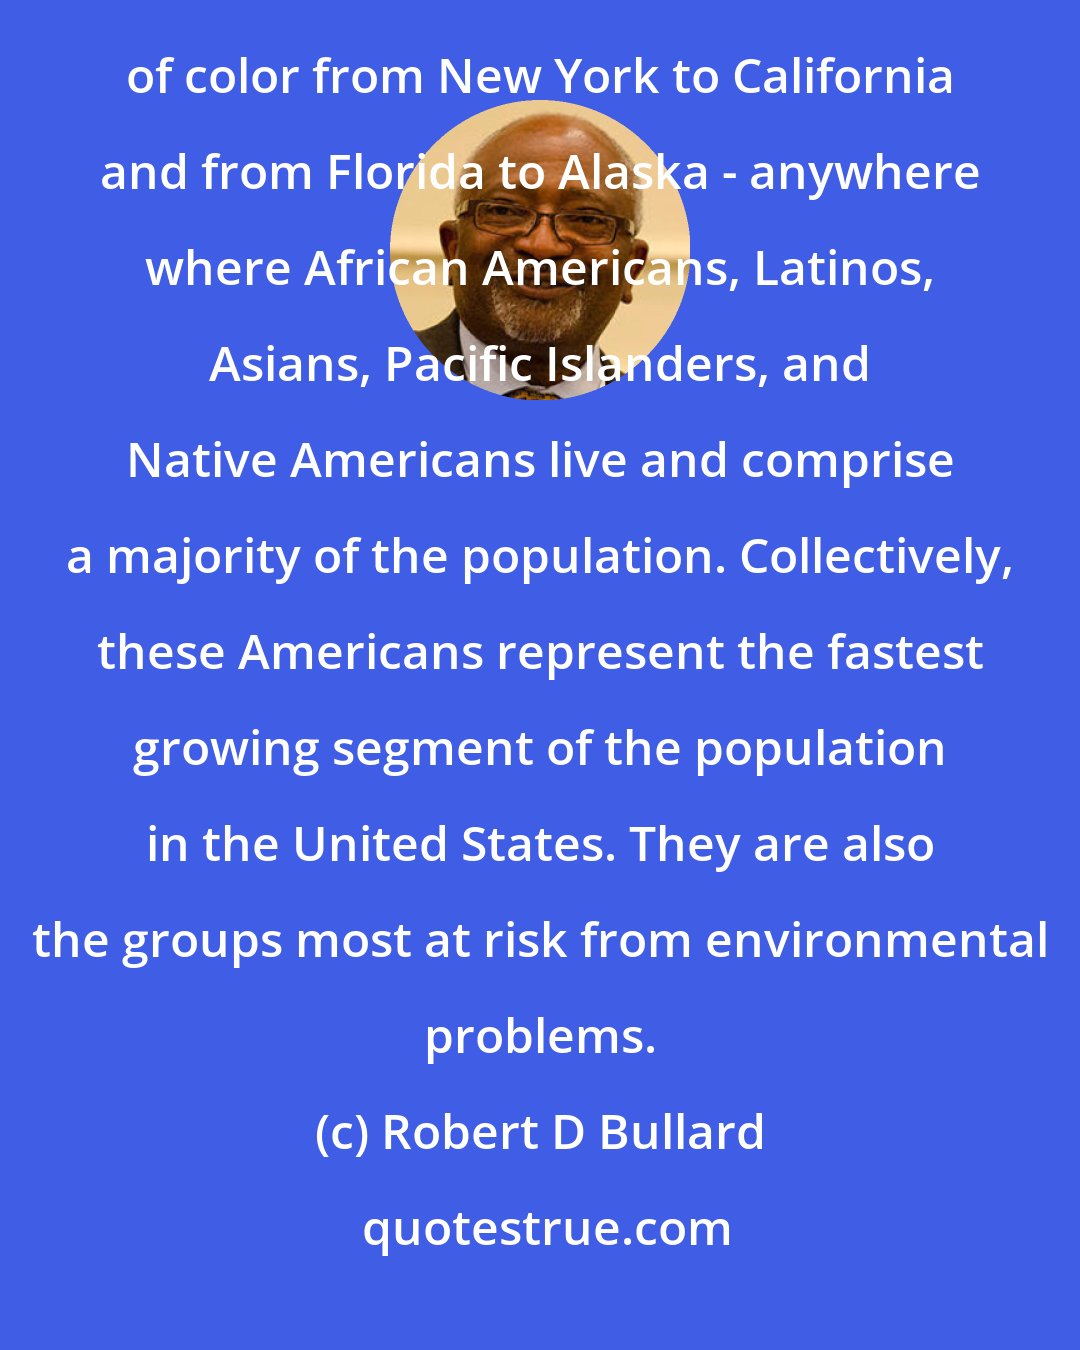 Robert D Bullard: An environmental revolution is taking shape in the United States. This revolution has touched communities of color from New York to California and from Florida to Alaska - anywhere where African Americans, Latinos, Asians, Pacific Islanders, and Native Americans live and comprise a majority of the population. Collectively, these Americans represent the fastest growing segment of the population in the United States. They are also the groups most at risk from environmental problems.